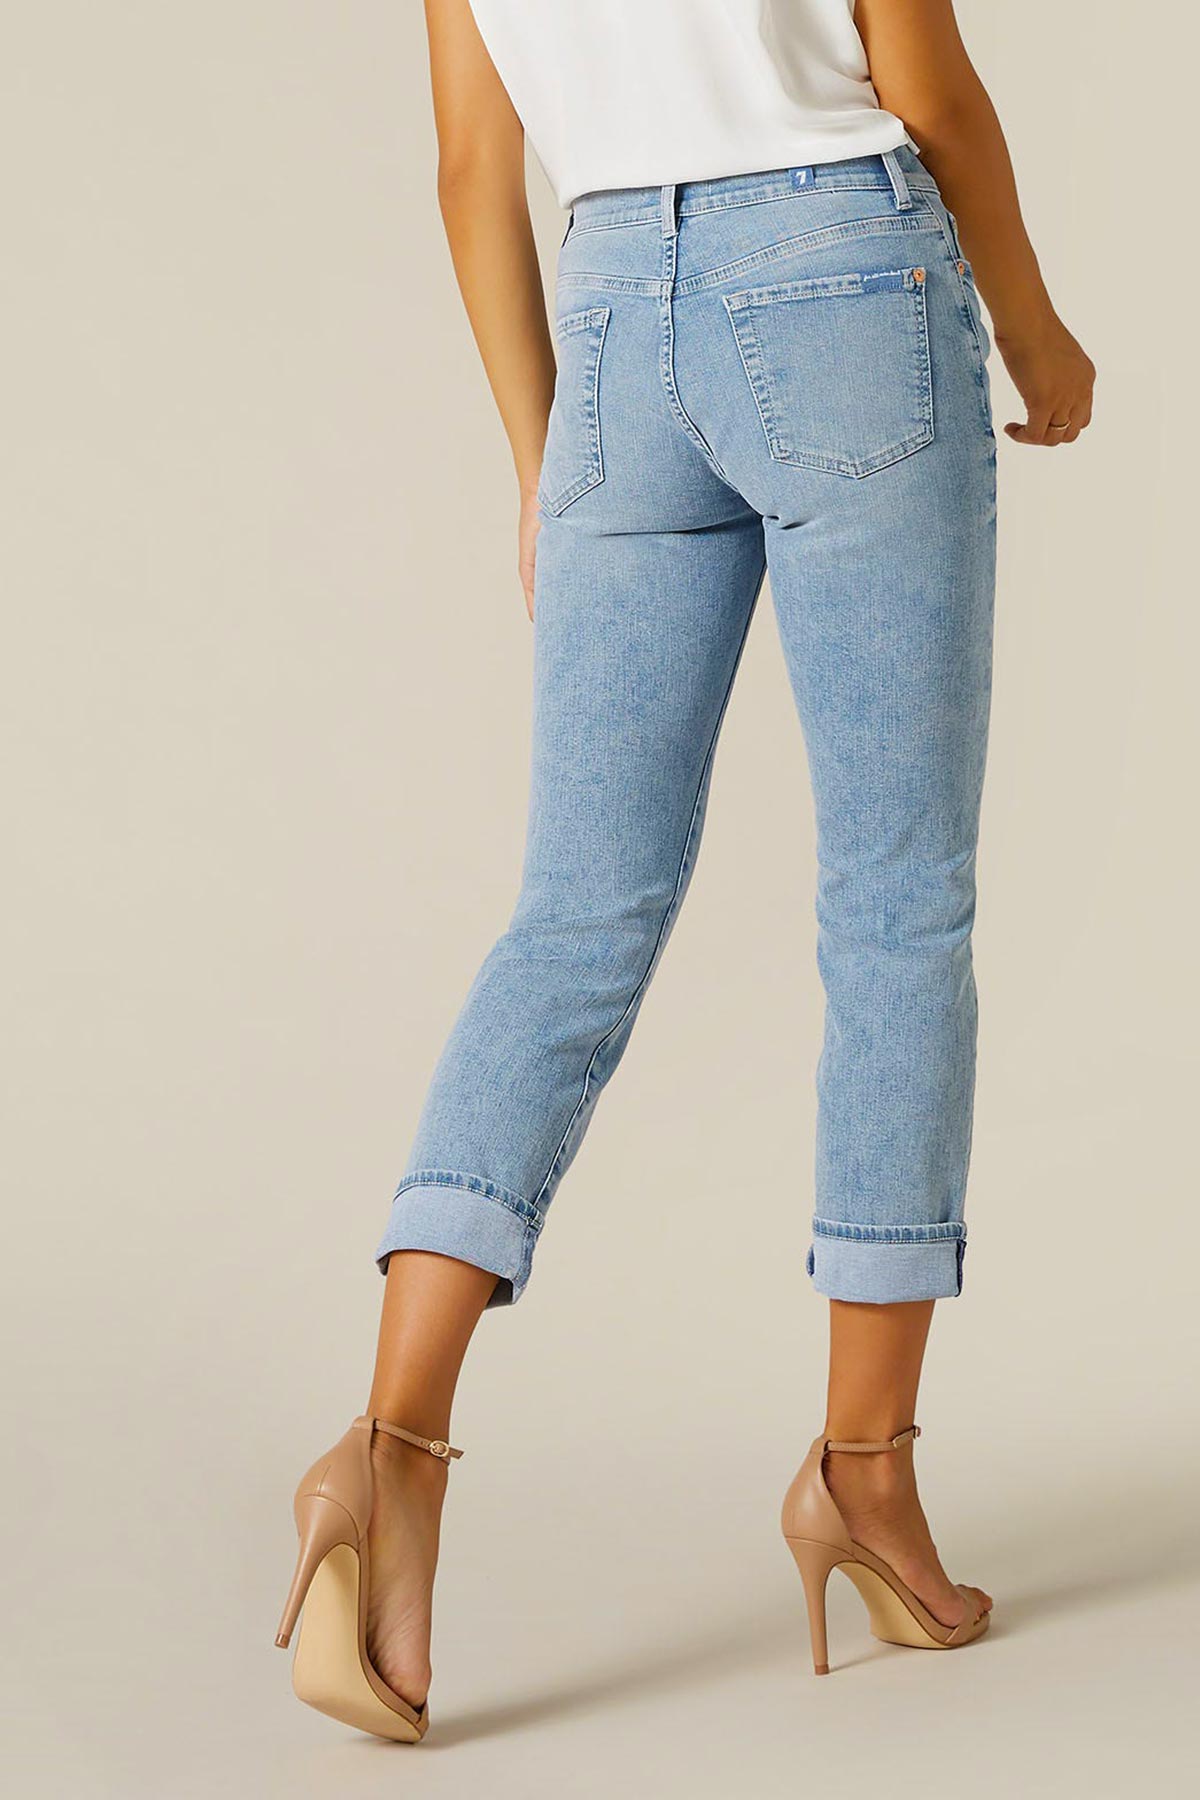 7 For All Mankind Relaxed Skinny Girlfriend Jeans-Libas Trendy Fashion Store